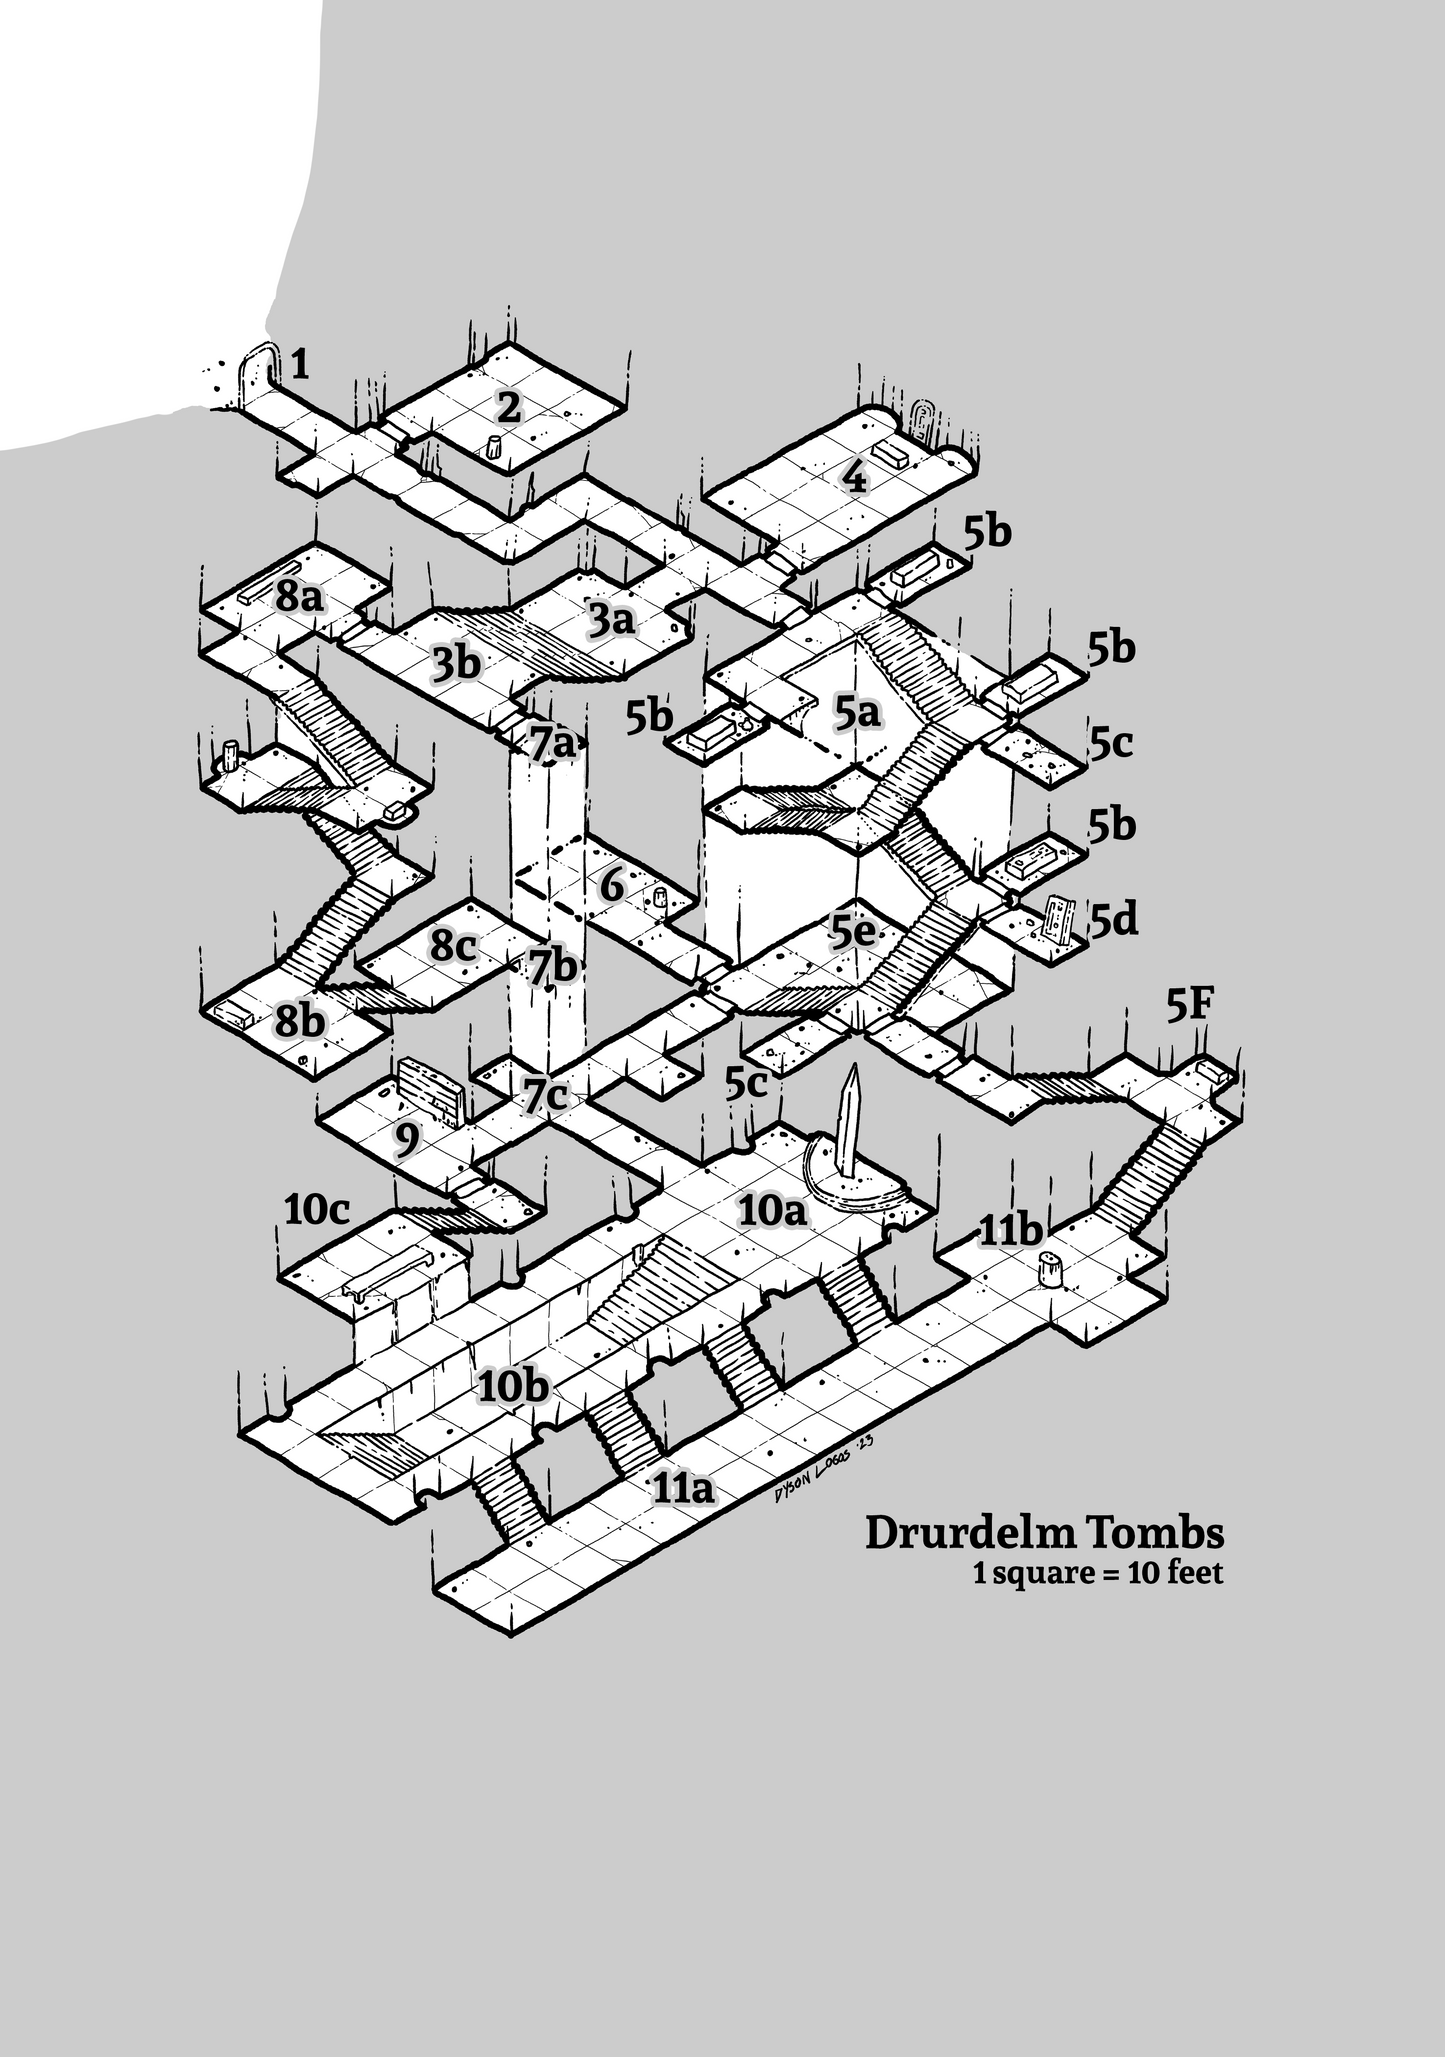 D&D 5e: Drurdelm Tombs (A Fifth Edition Adventure for Level 5)